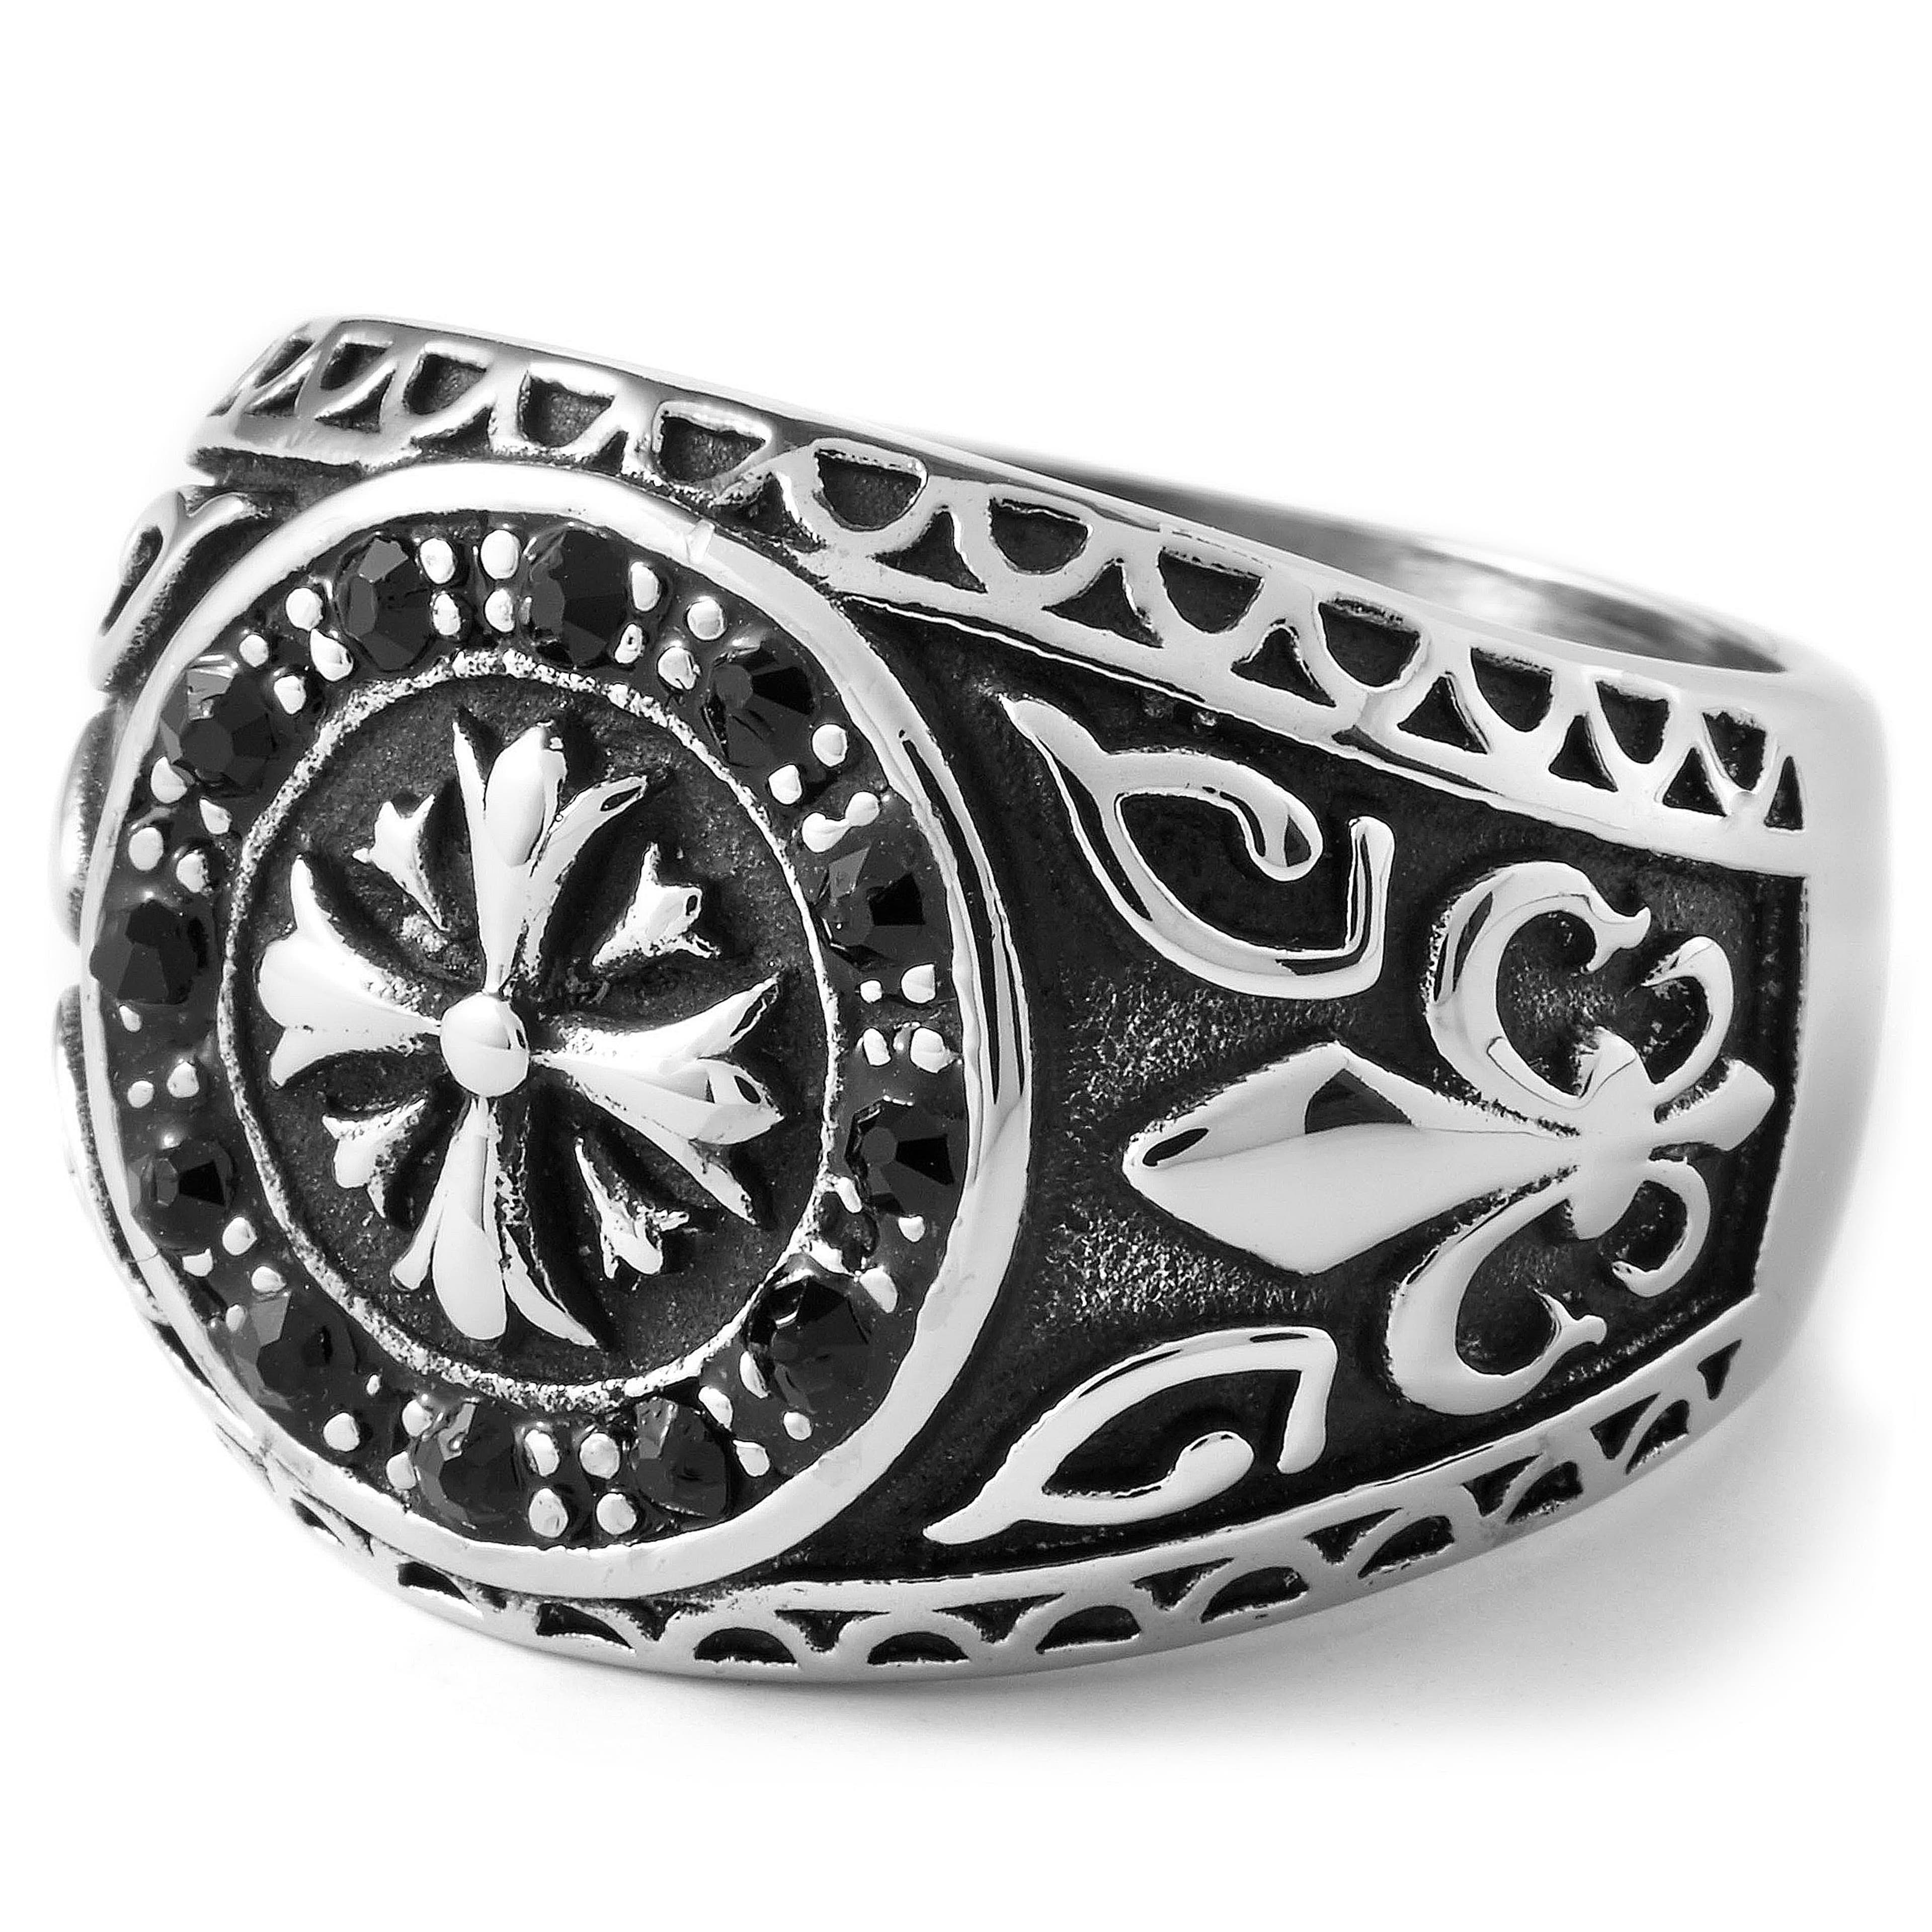 Silver-Tone Stainless Steel Templar Theme Signet Ring